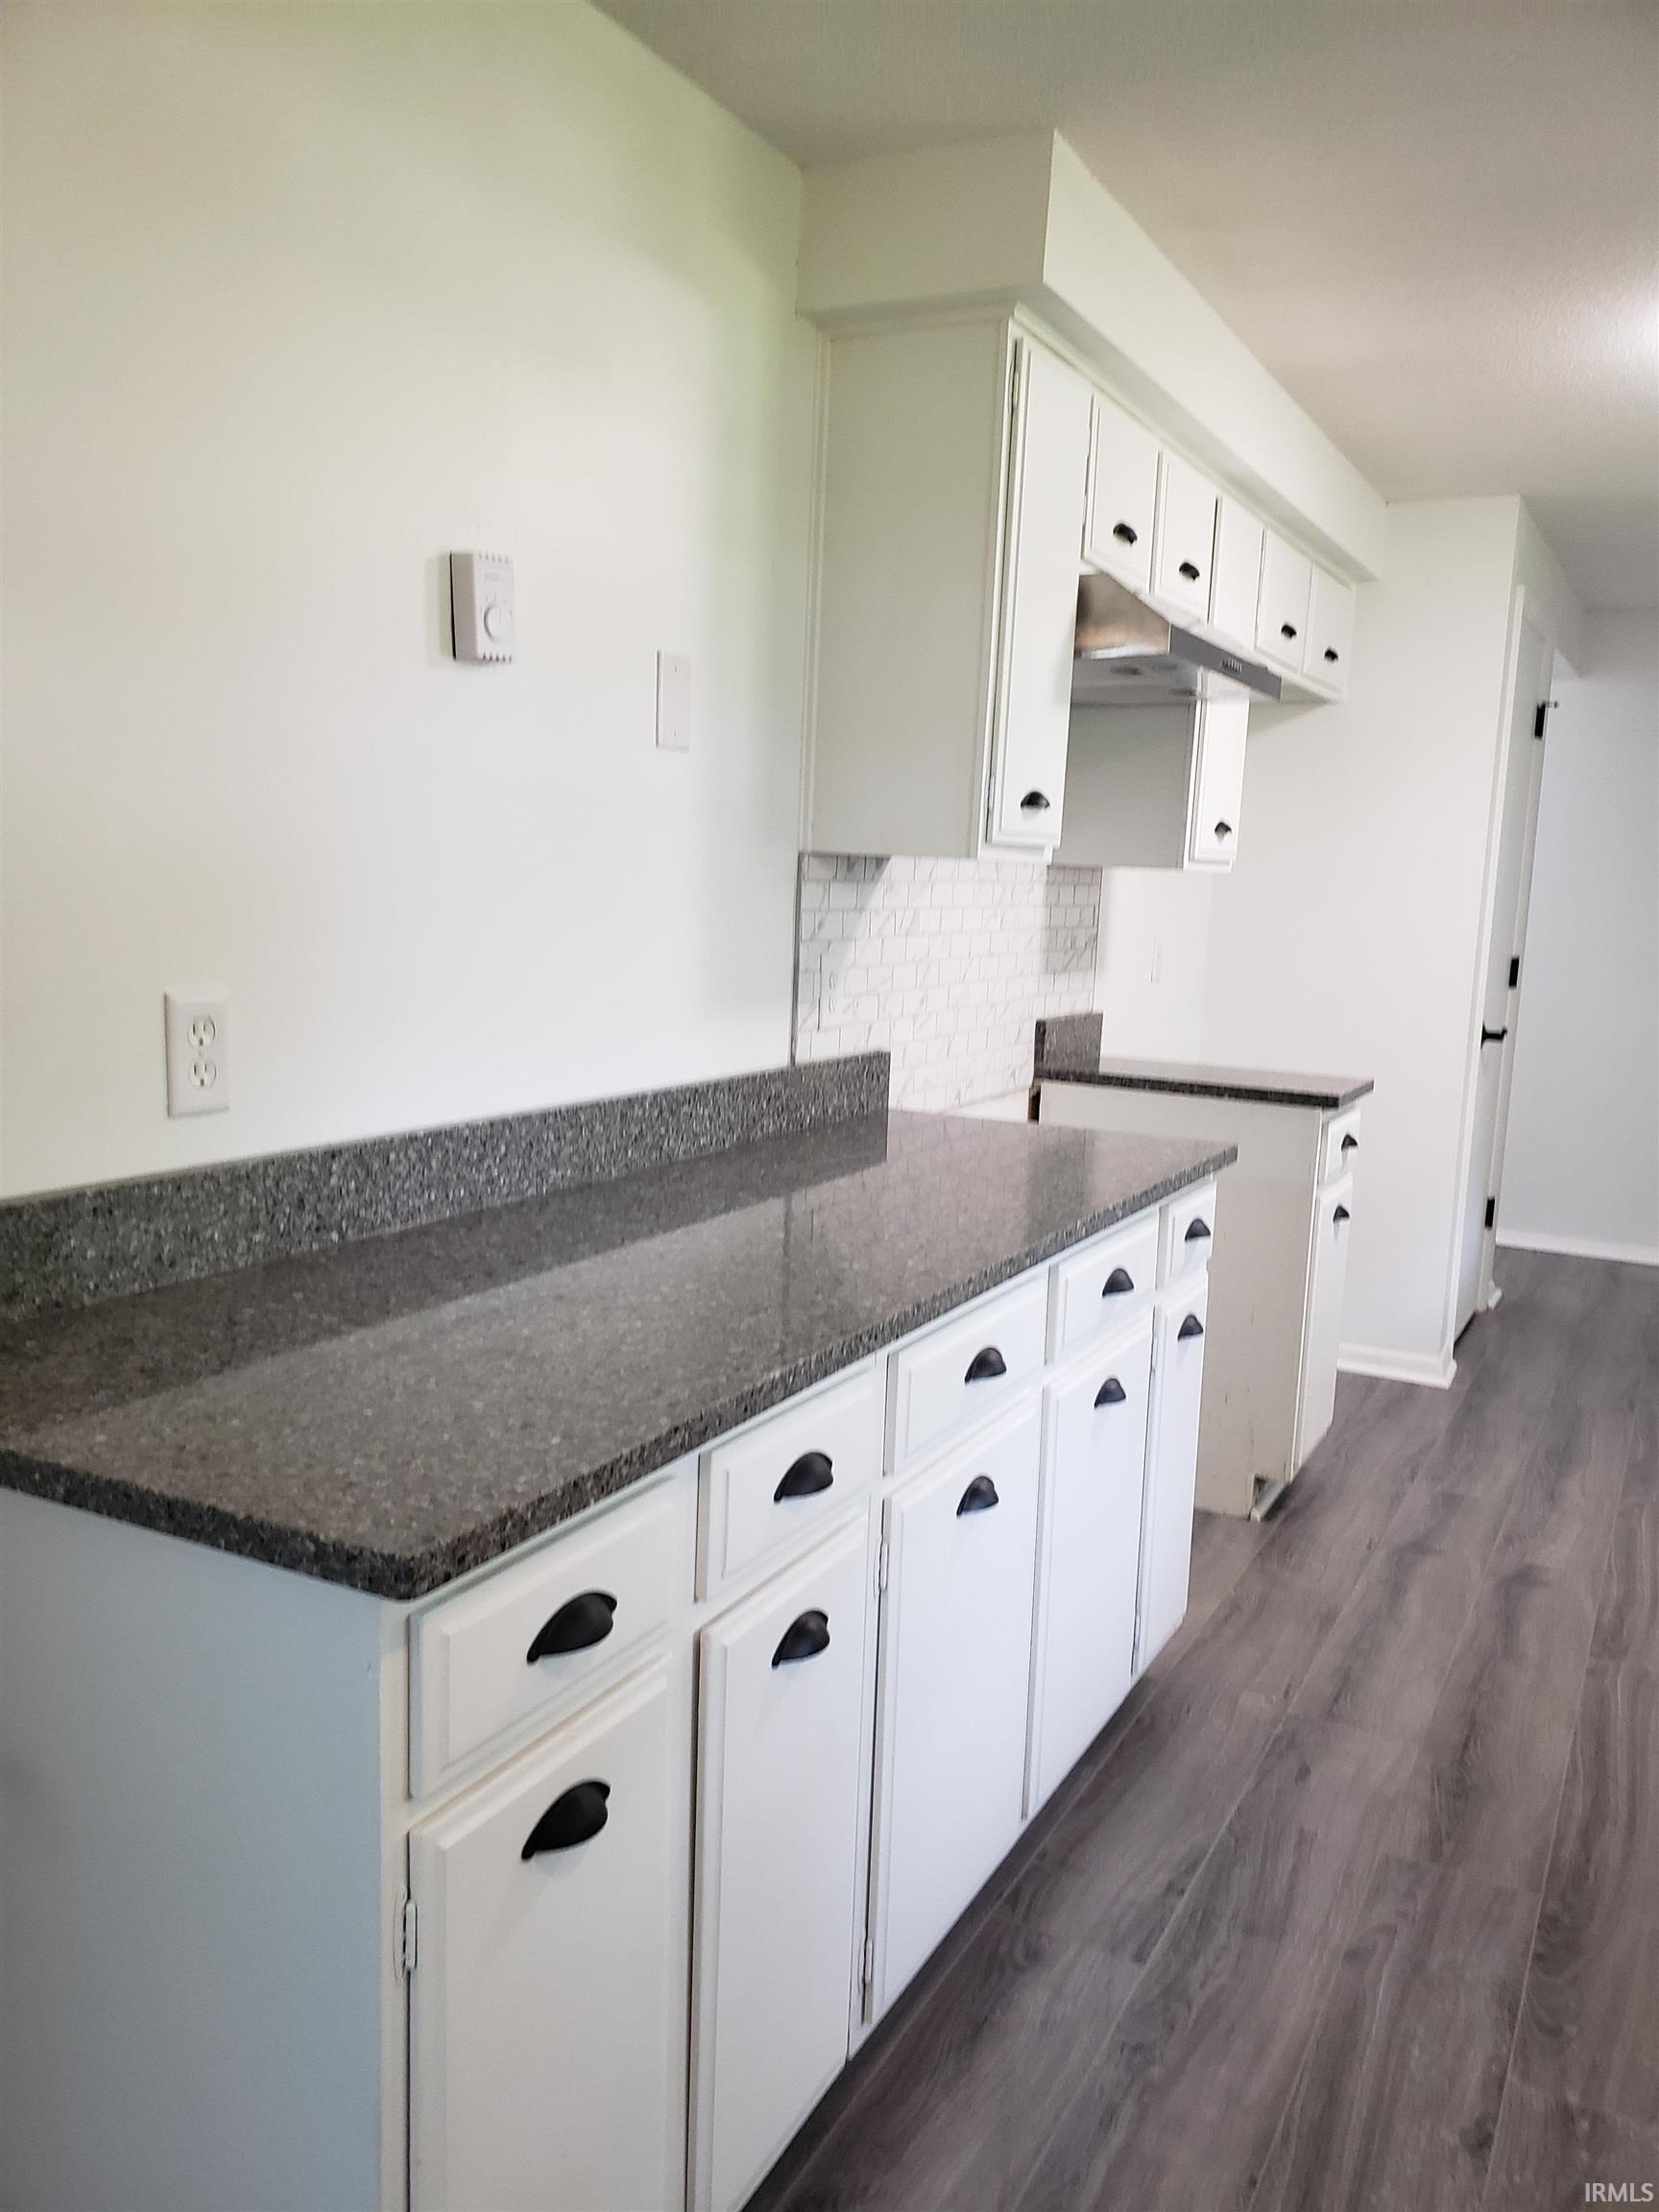 Large expanse of new quartz counter tops, ample storage.  Design opportunity for buyer to open kitchen to living room and provide bar seating at their expense to create an open plan.